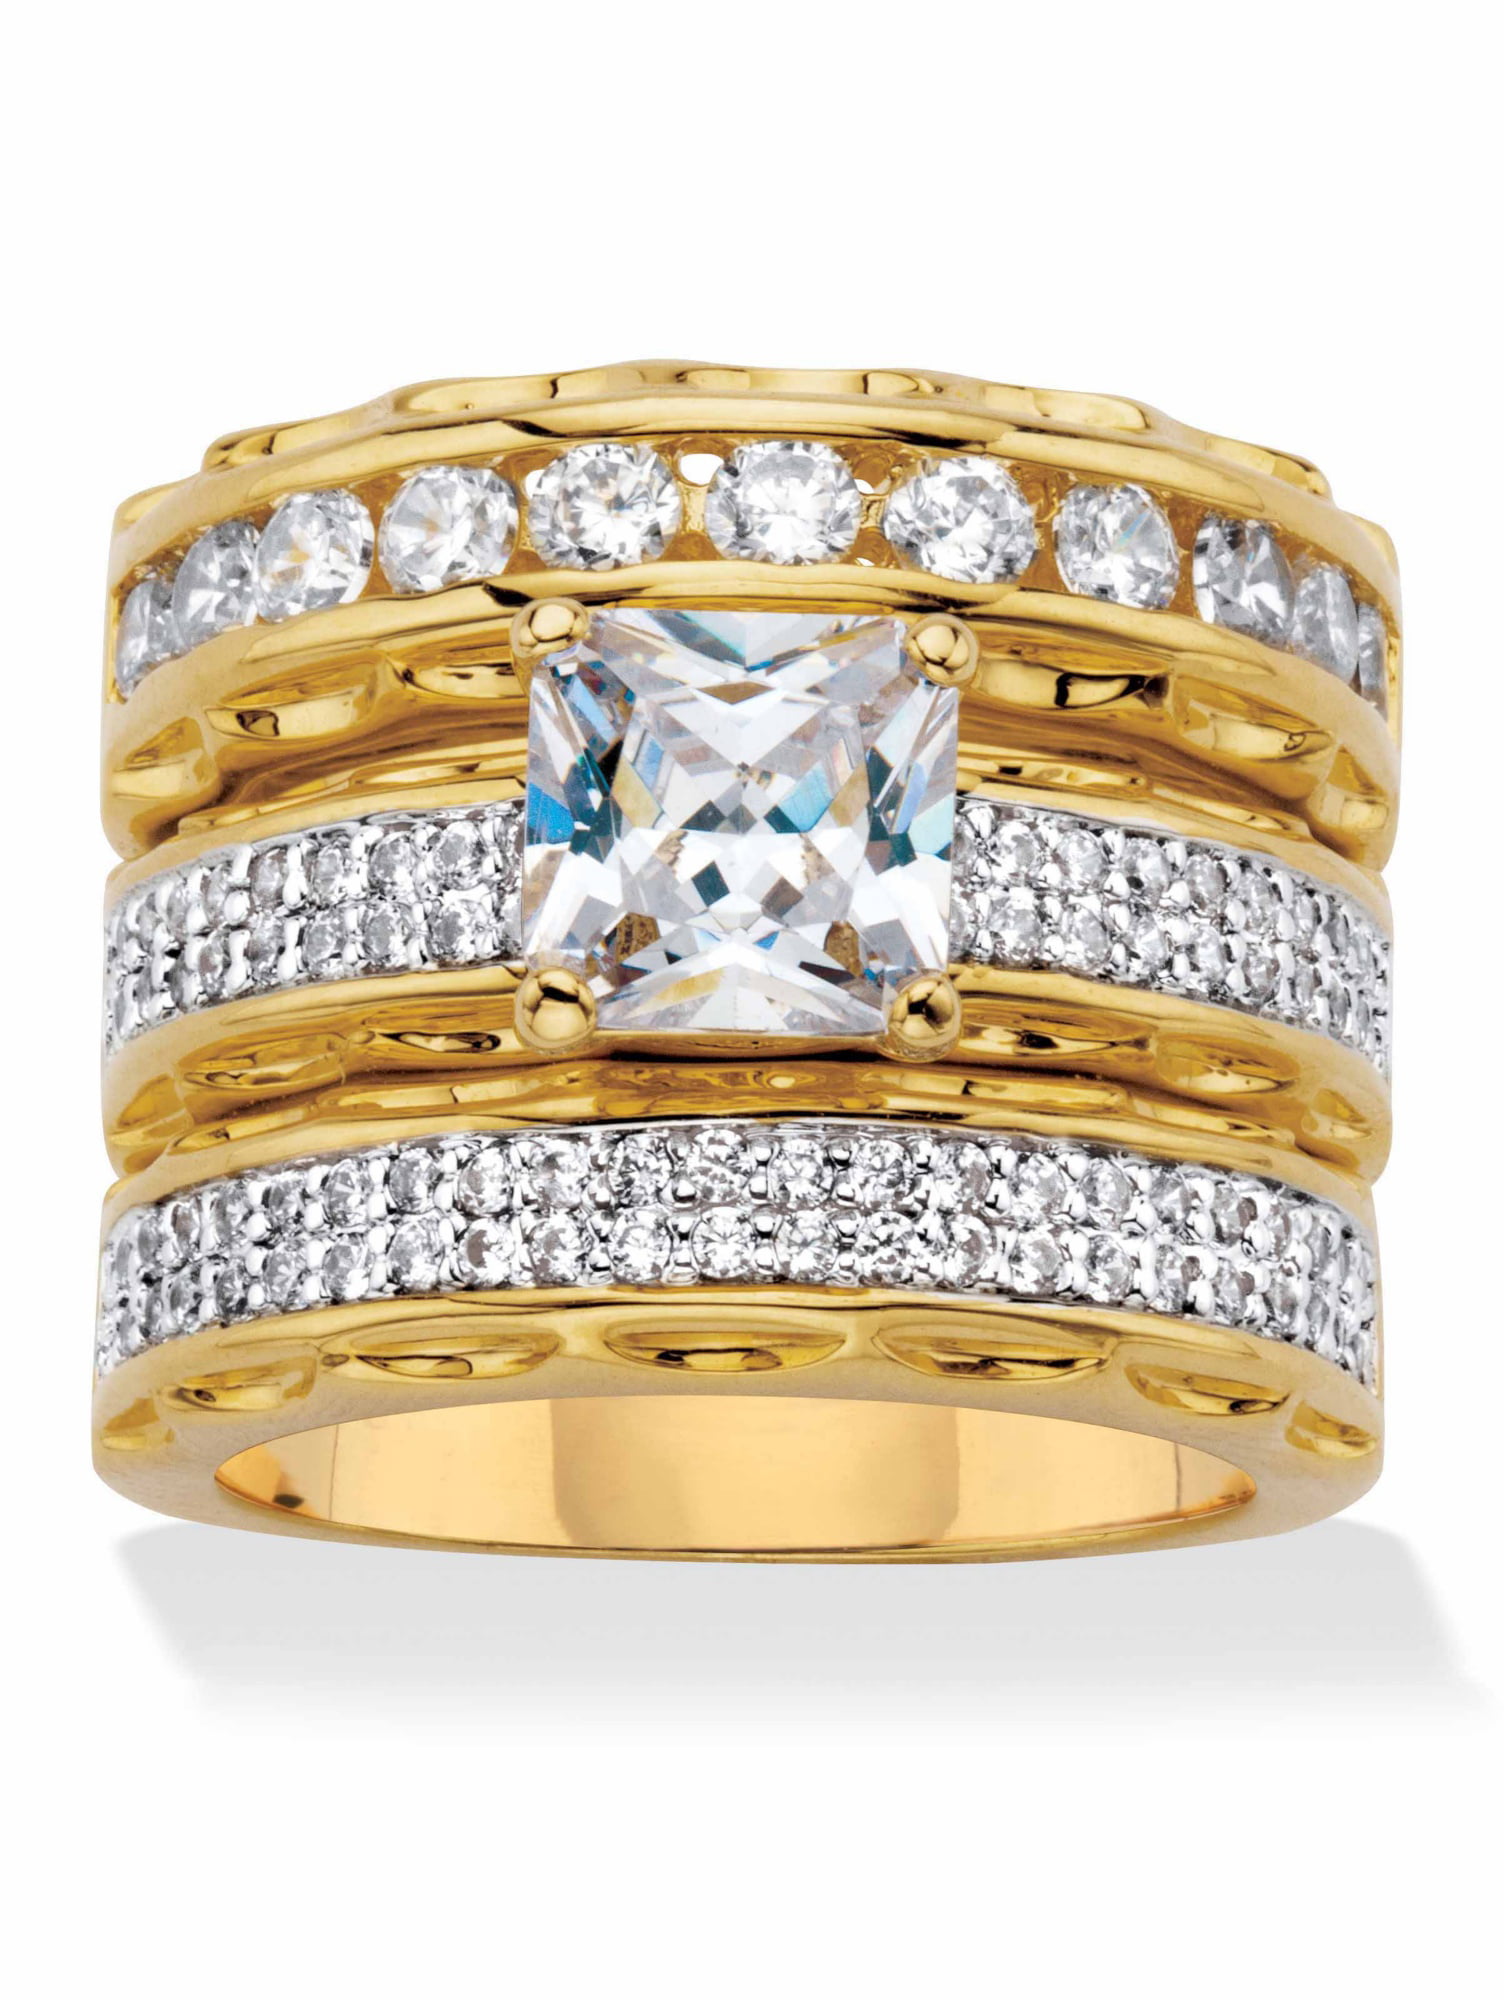 FT-Ring Fashion Gold Plated Ring for Women Luxury Love Gifts Blue Jewelry Wedding Rings T&T